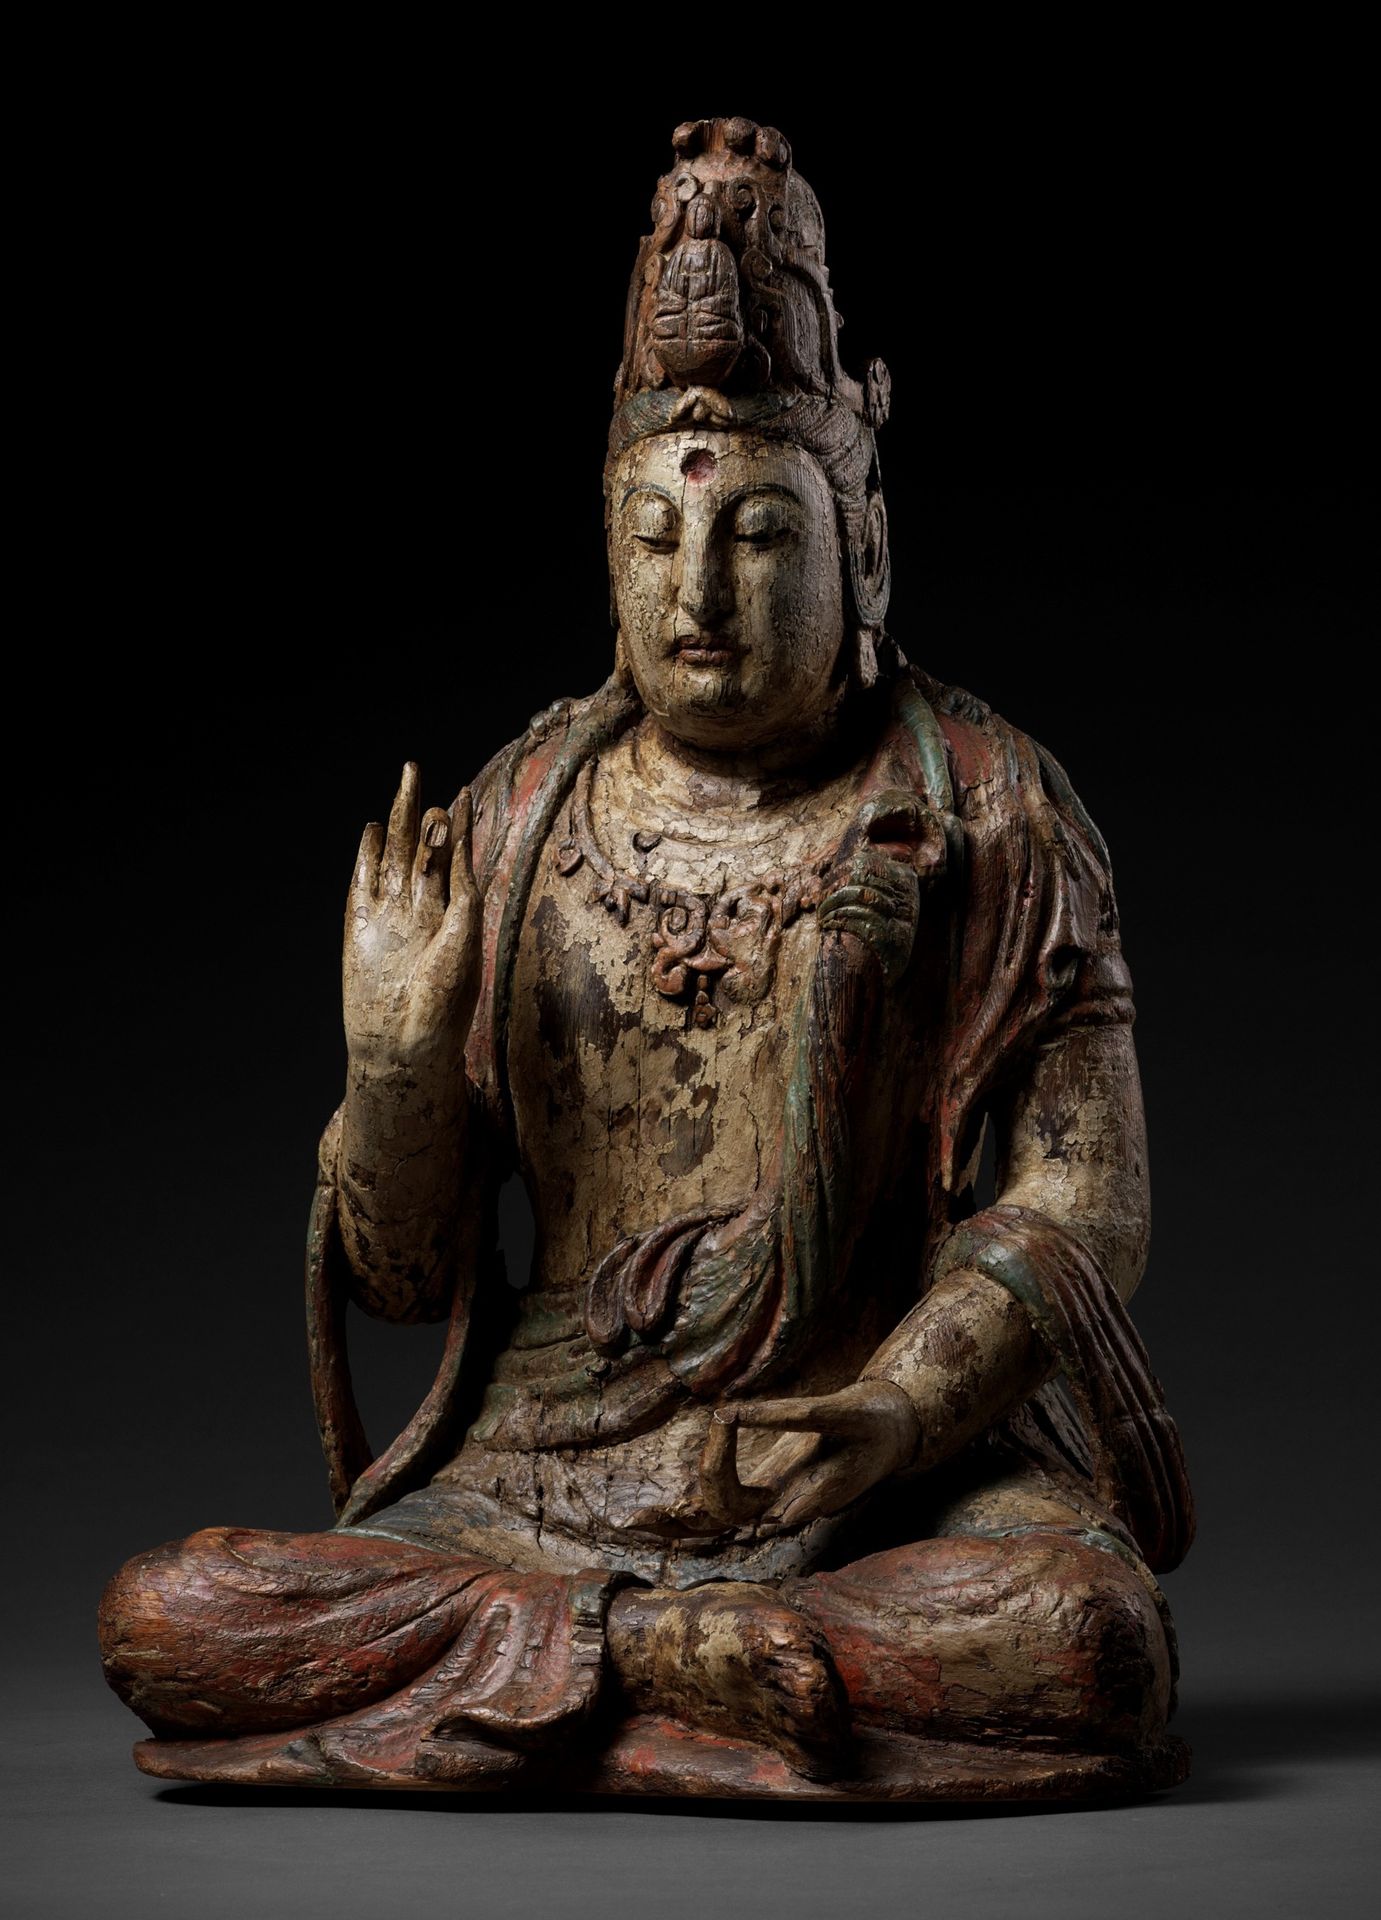 A POLYCHROME-PAINTED WOOD FIGURE OF GUANYIN, MING DYNASTY 明代观音菩萨木雕像
中国，1368-1644&hellip;